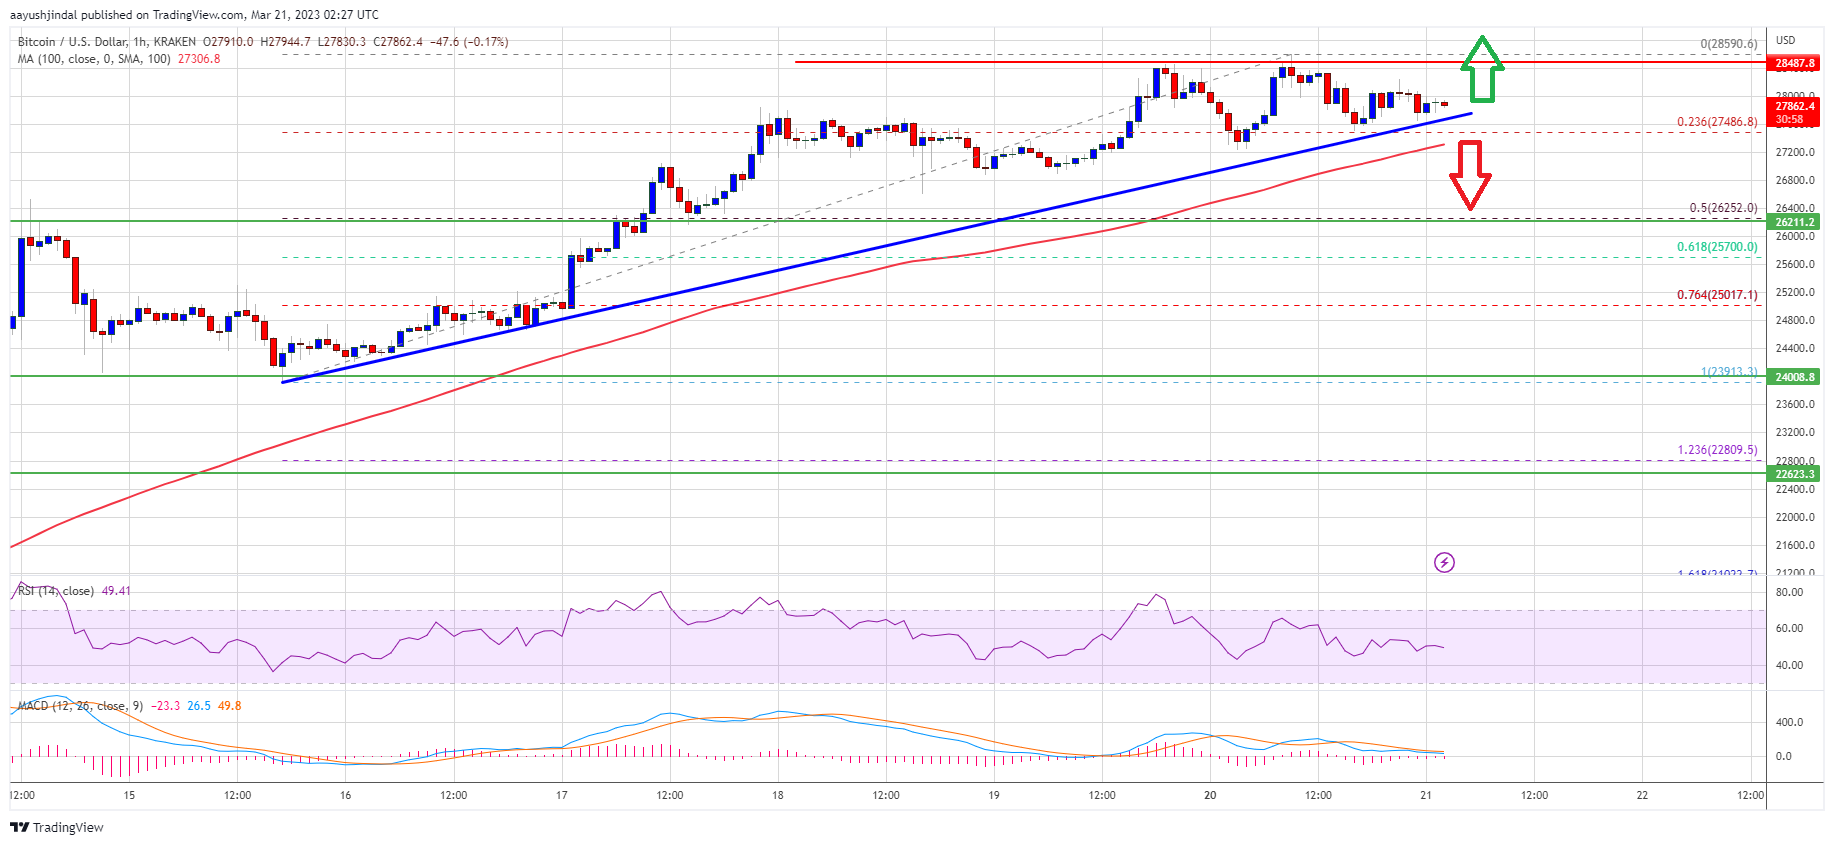 Bitcoin Bulls Take Break, What Could Trigger A Downside Correction